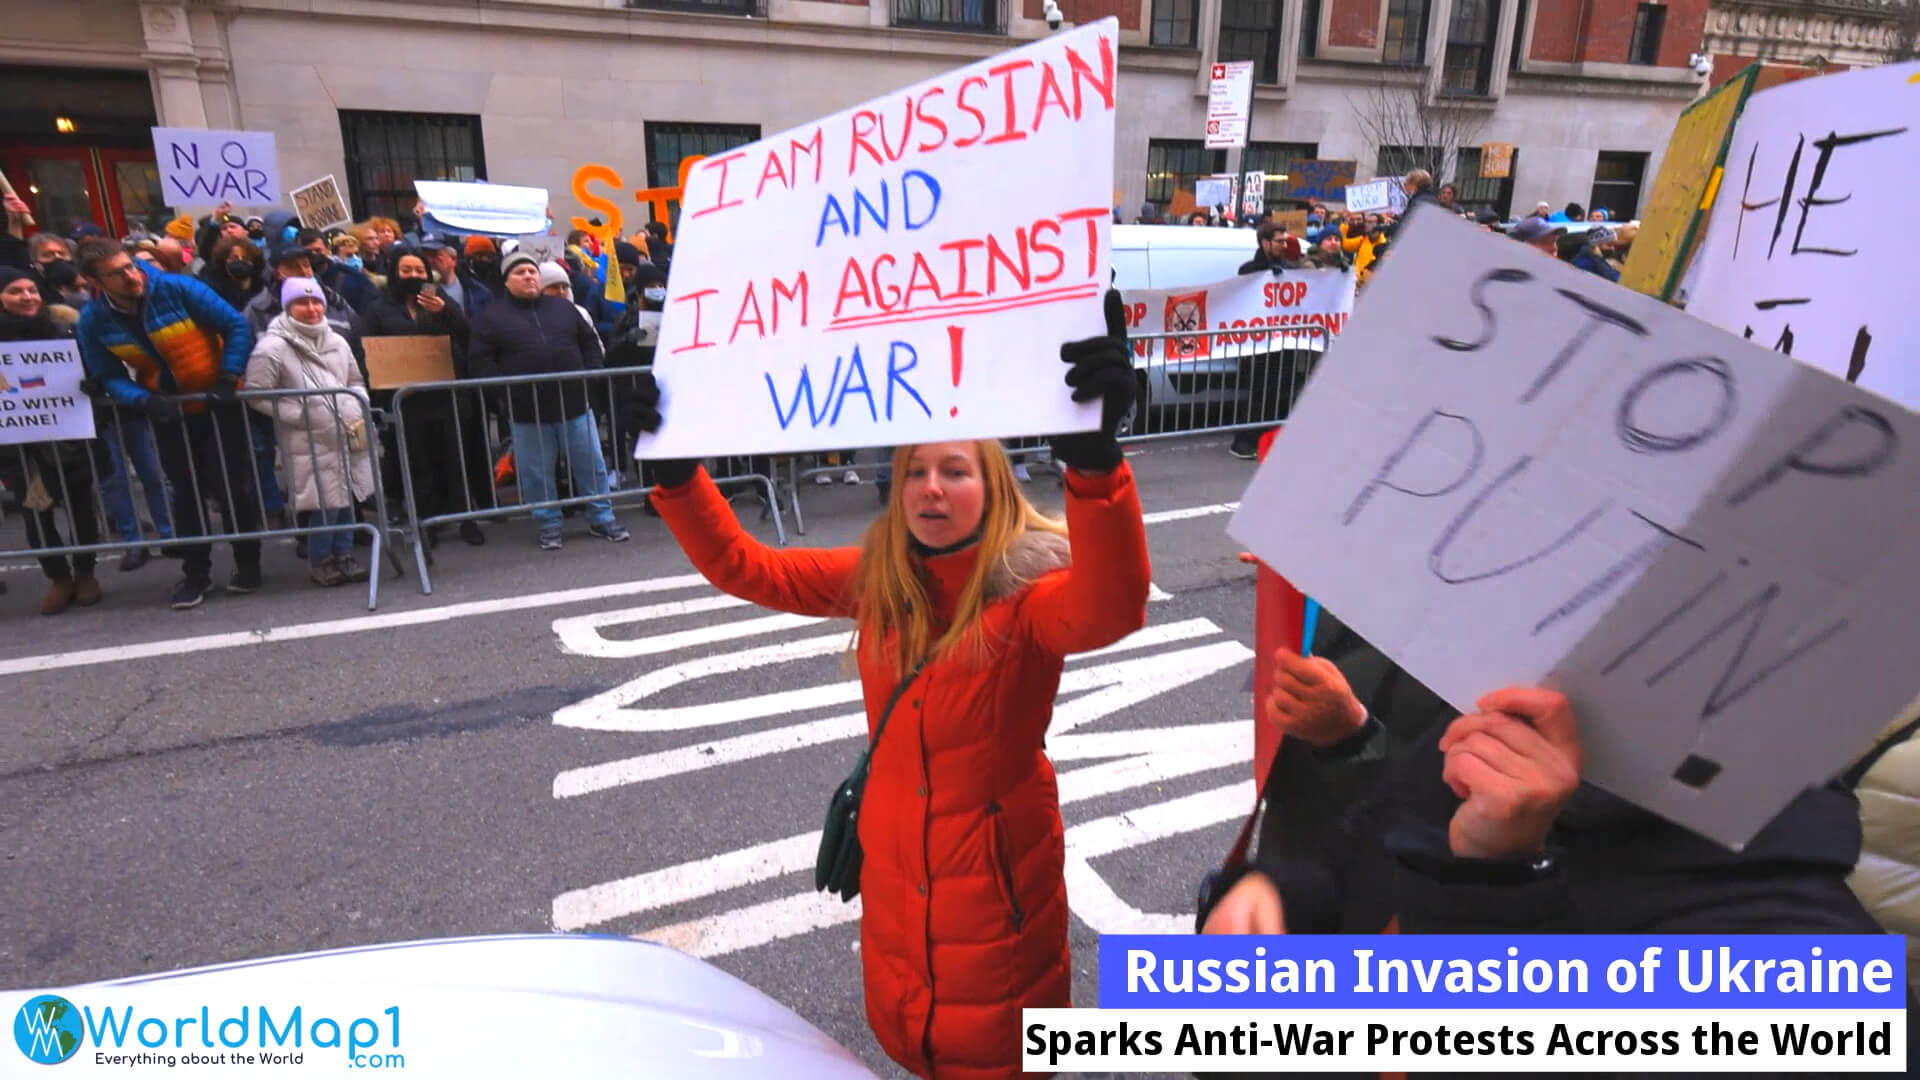 Russian Invasion of Ukraine Sparks Anti-War Protests Across the World